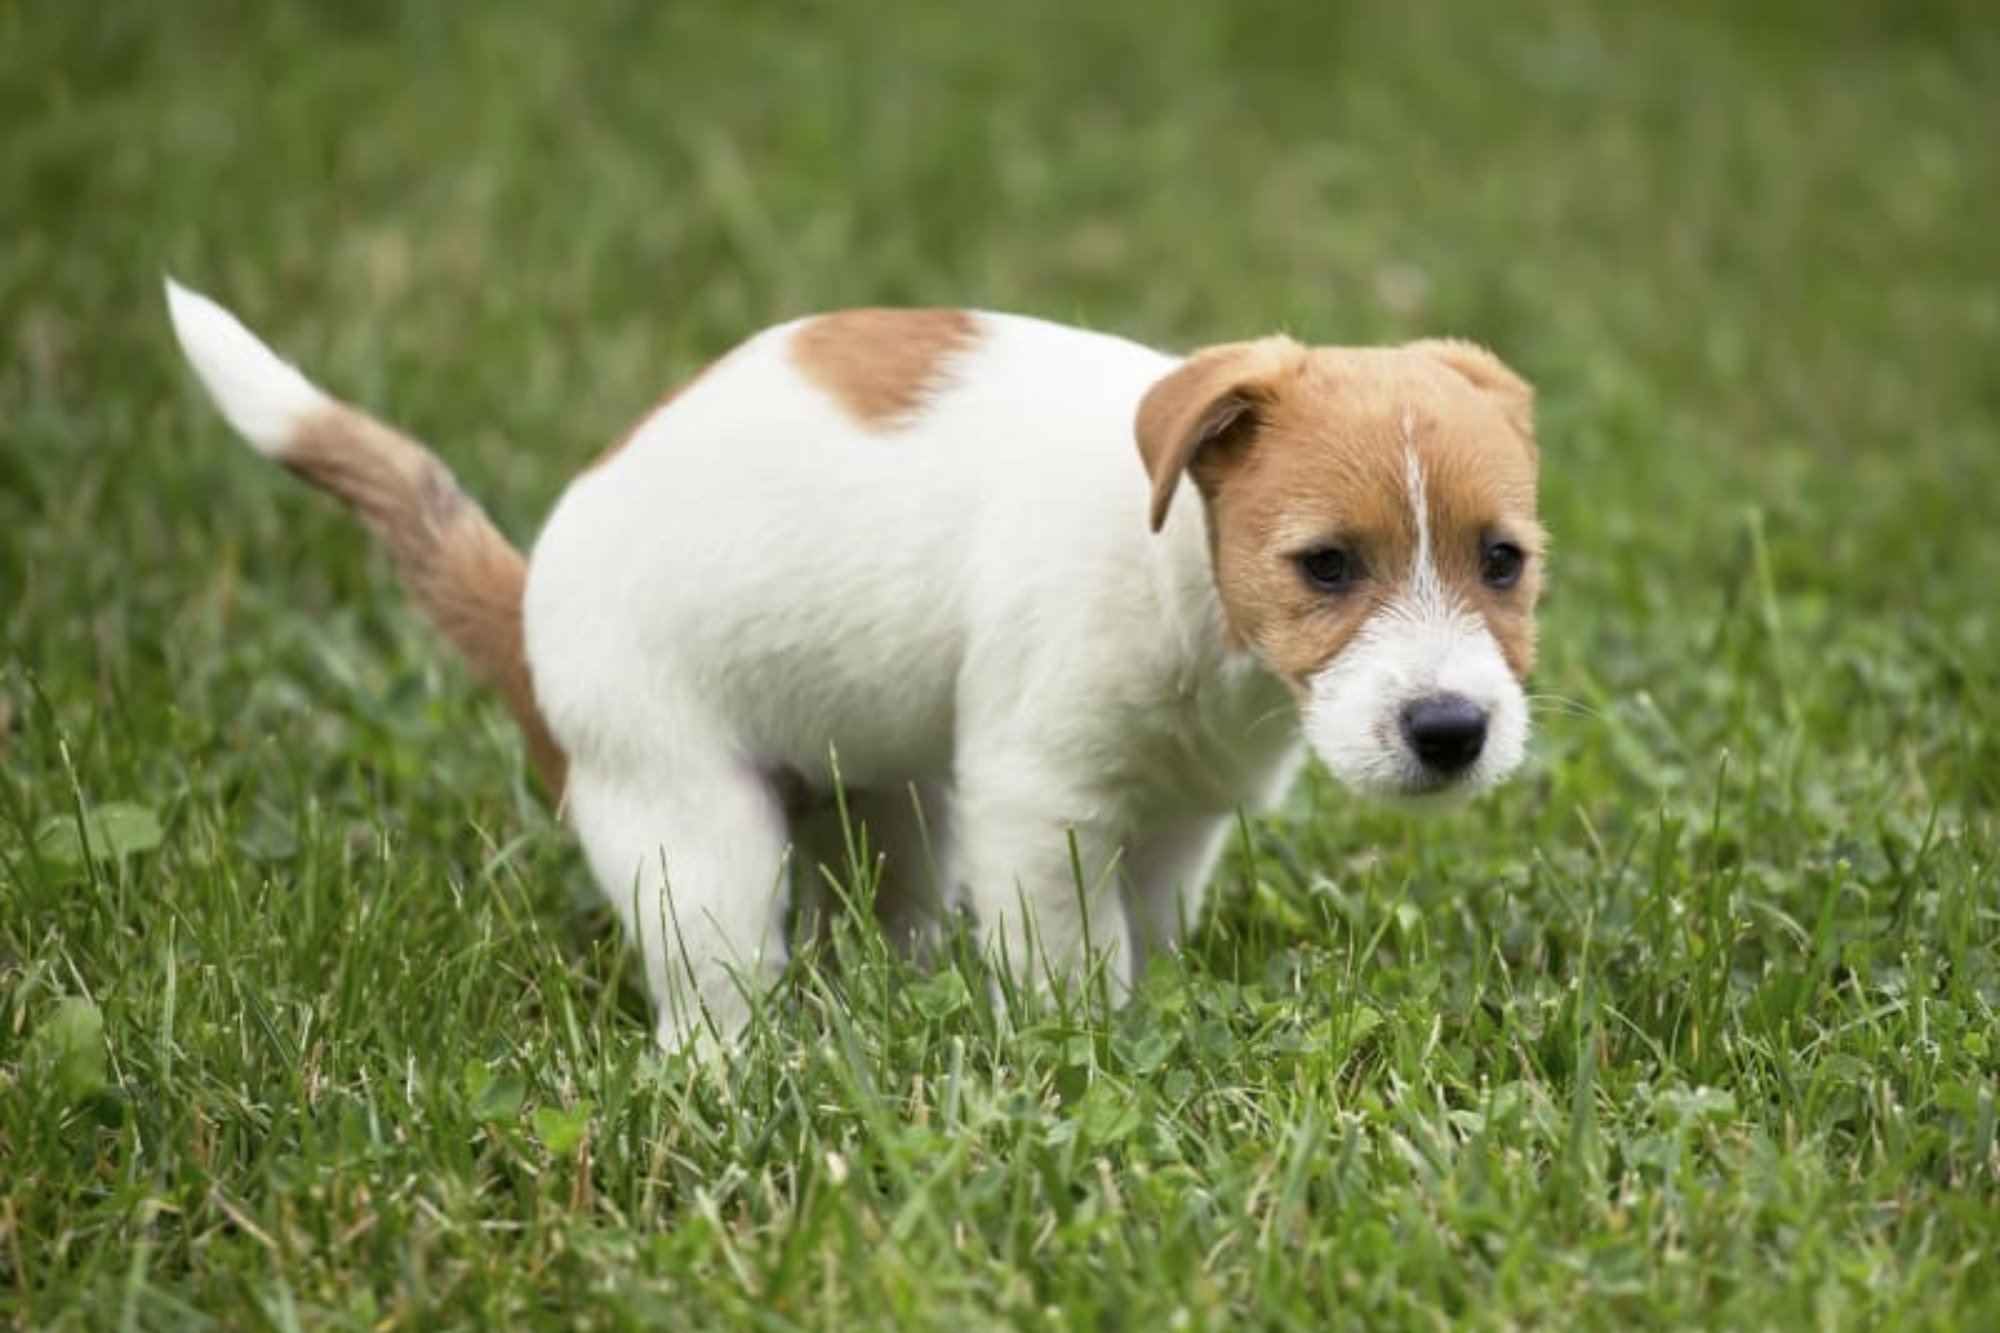 Why Does My Puppy Have Diarrhea?